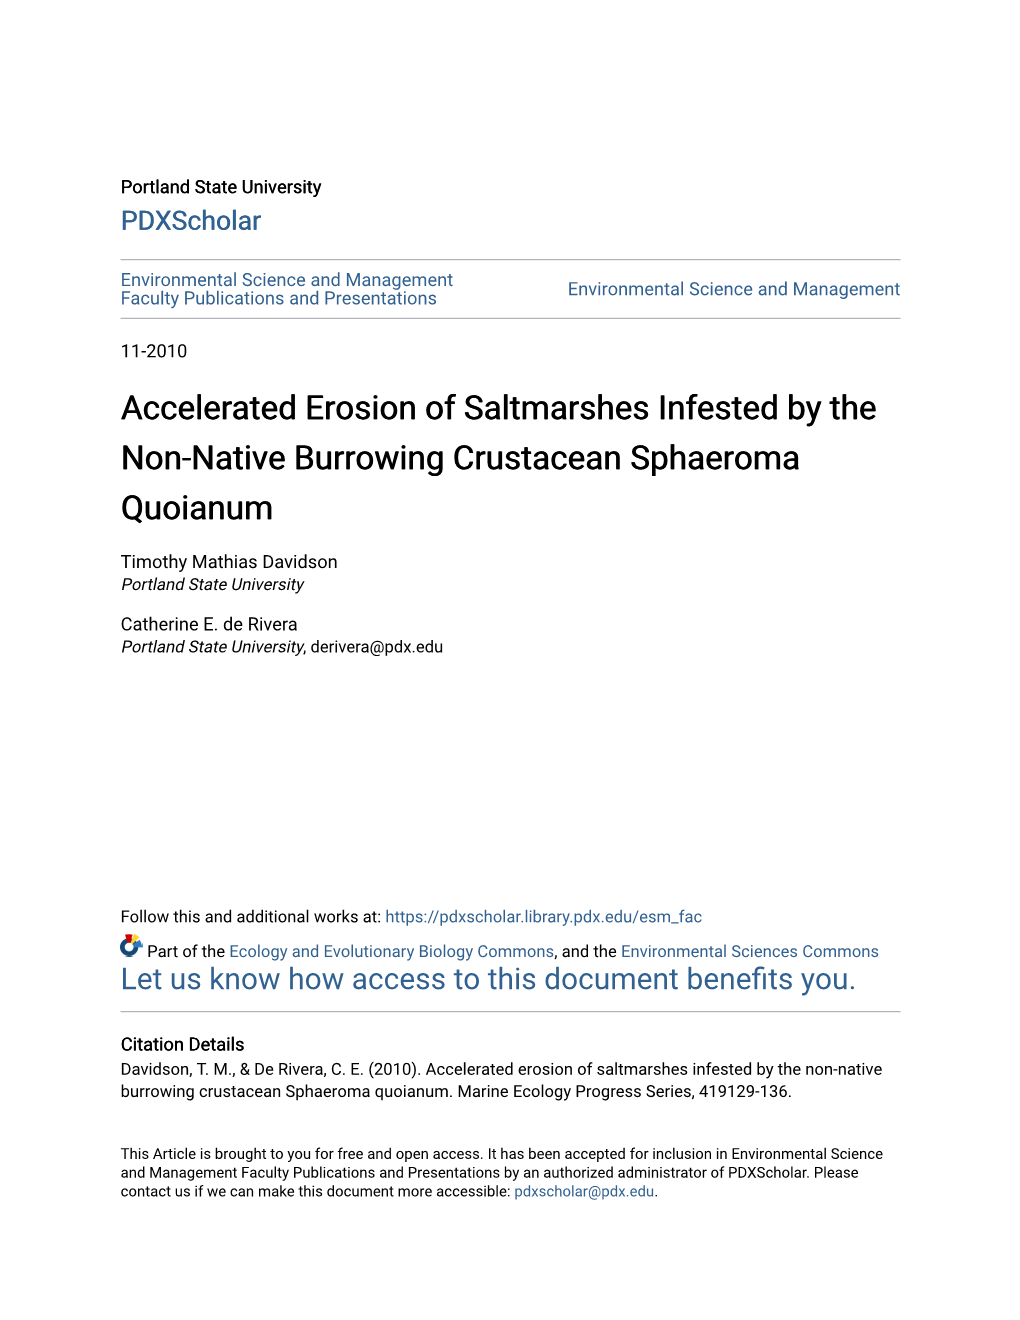 Accelerated Erosion of Saltmarshes Infested by the Non-Native Burrowing Crustacean Sphaeroma Quoianum